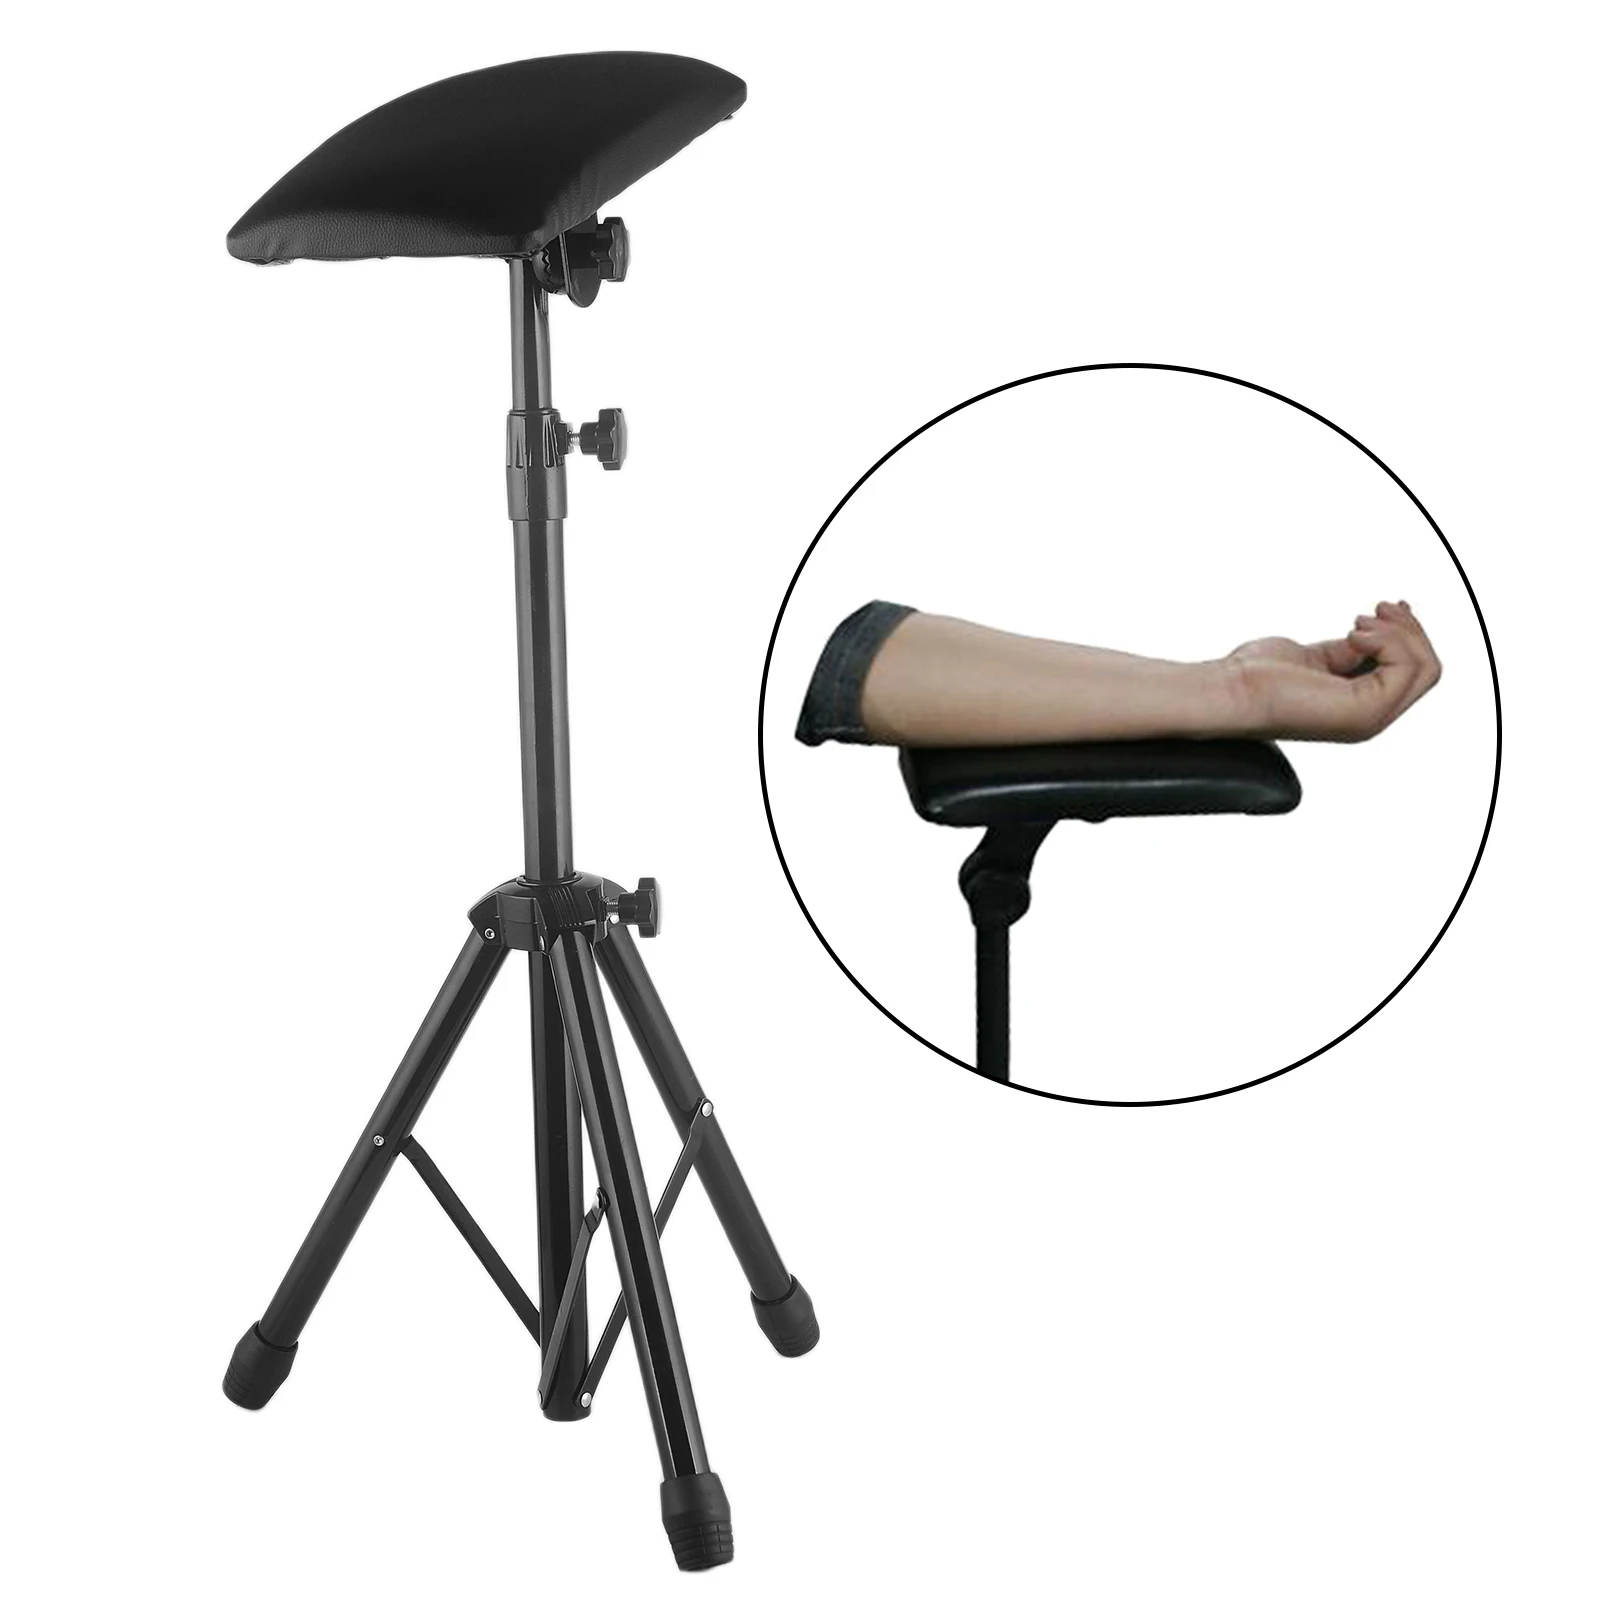 Iron Protable Tattoo Armrest Stand Foldable Tripod Tattoo Arm Leg Rest Chair Fully Ajustable Tattoo for Work Supply Bed Stool foot rest non slip pedicure foot stool smooth edge multifunctional foot rest stand